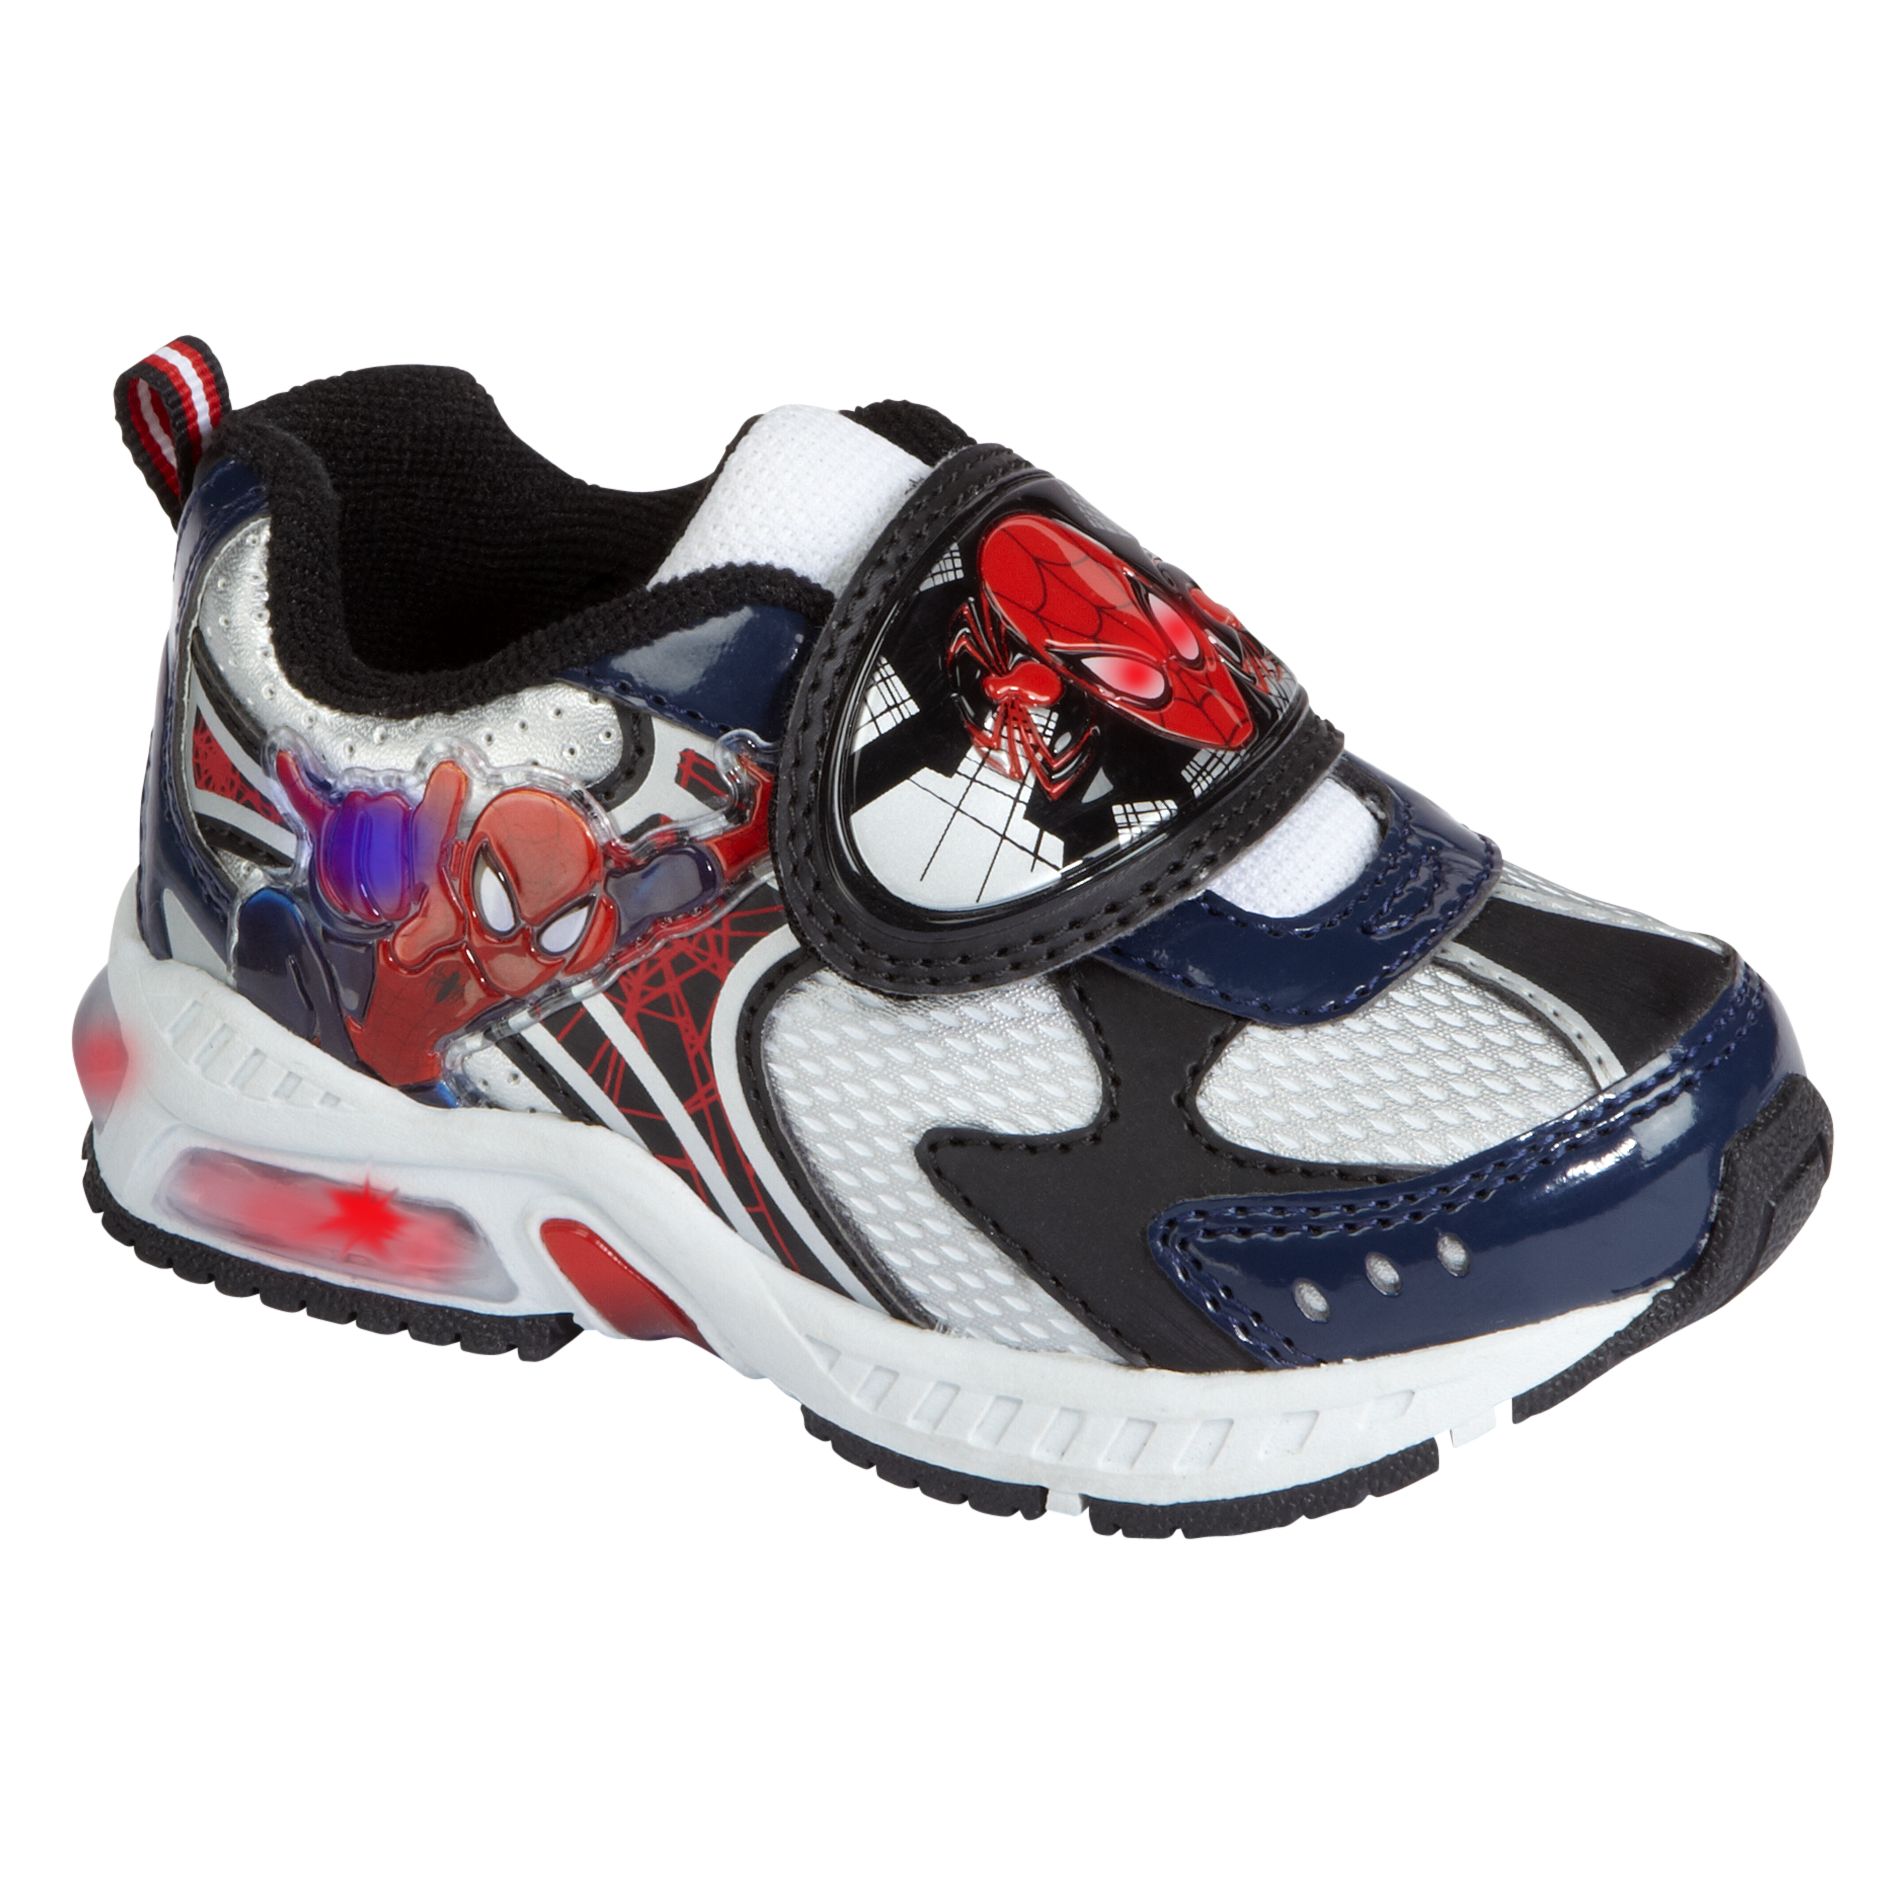 Character Toddler Boy's Spiderman Lighted Athletic Shoe - Black